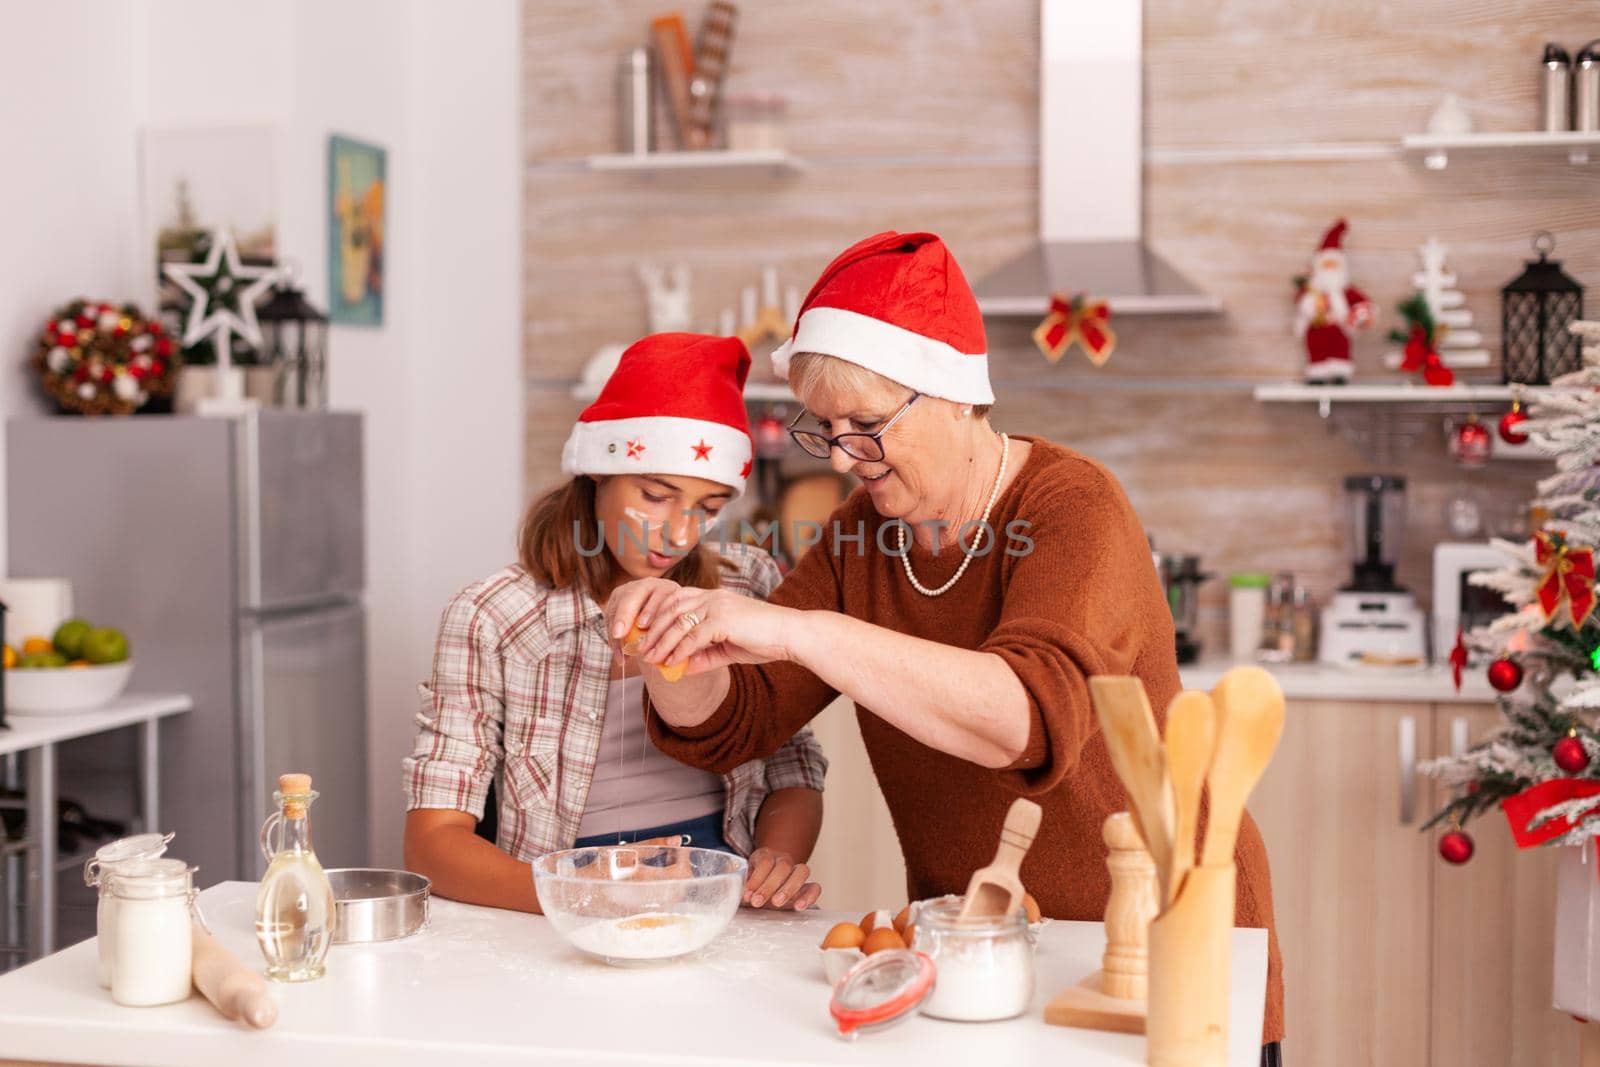 Grandmother showing to children how to prepare cookies dough breaking eggs in ingredients bowl enjoying winter holiday together in xmas decorated kitchen. Family celebrating christmas season